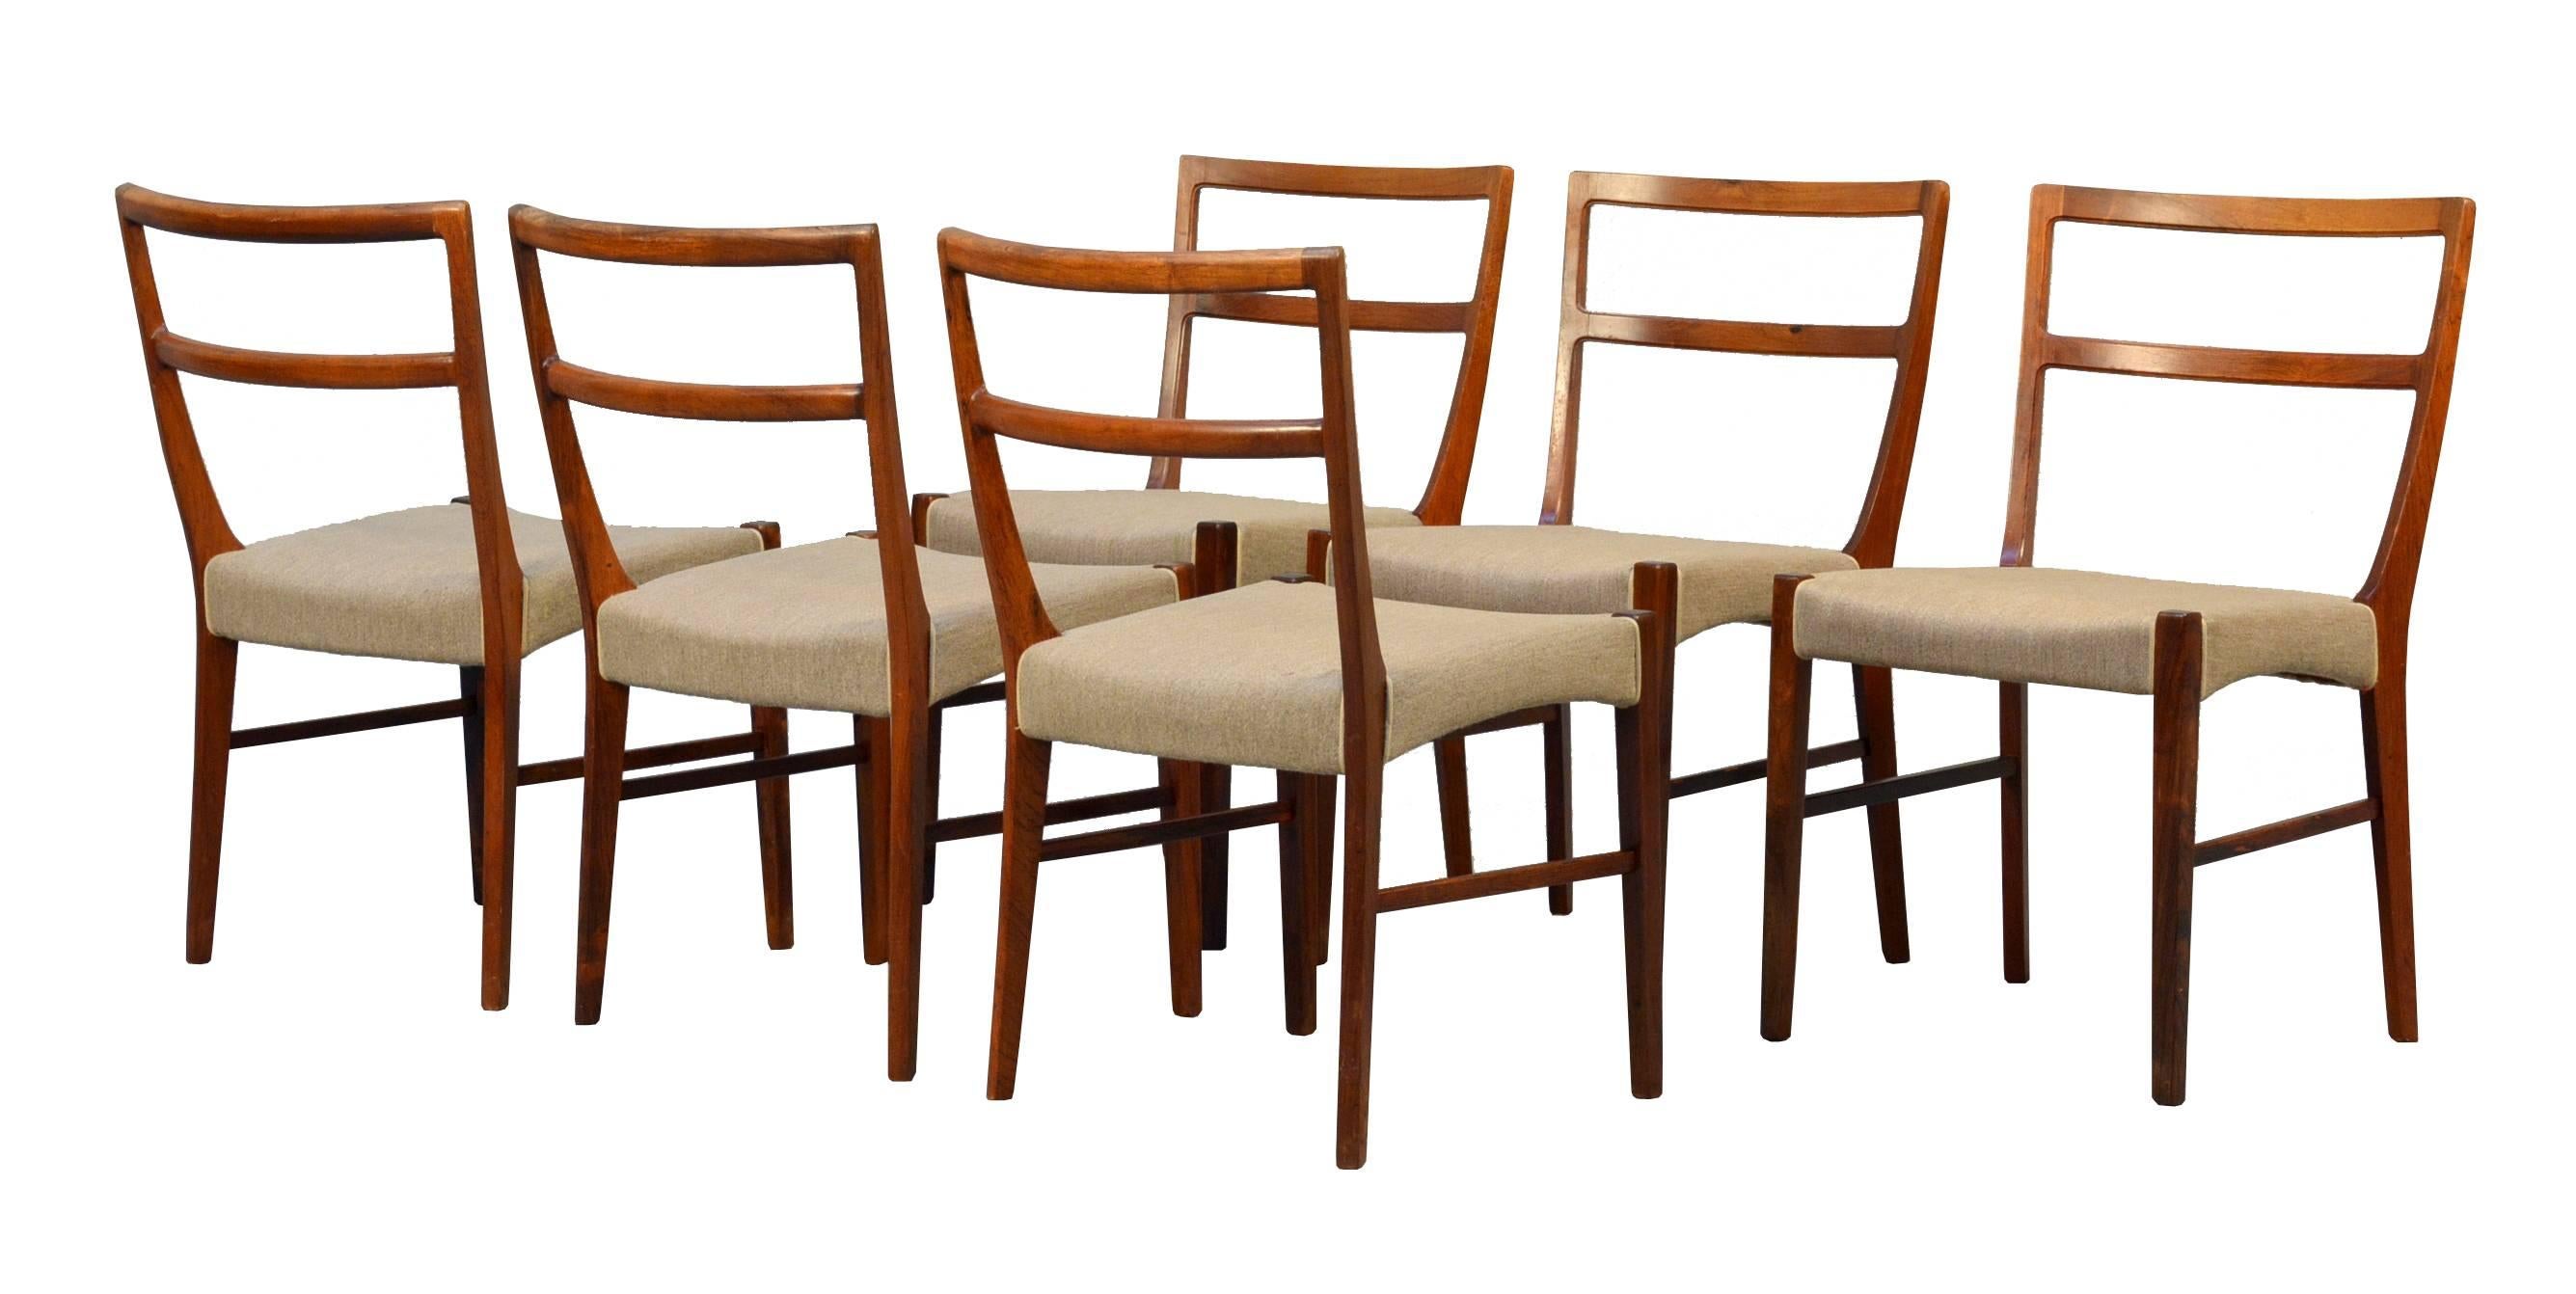 Danish Mid-Century Modern Chairs by Johannes Andersen in Rosewood